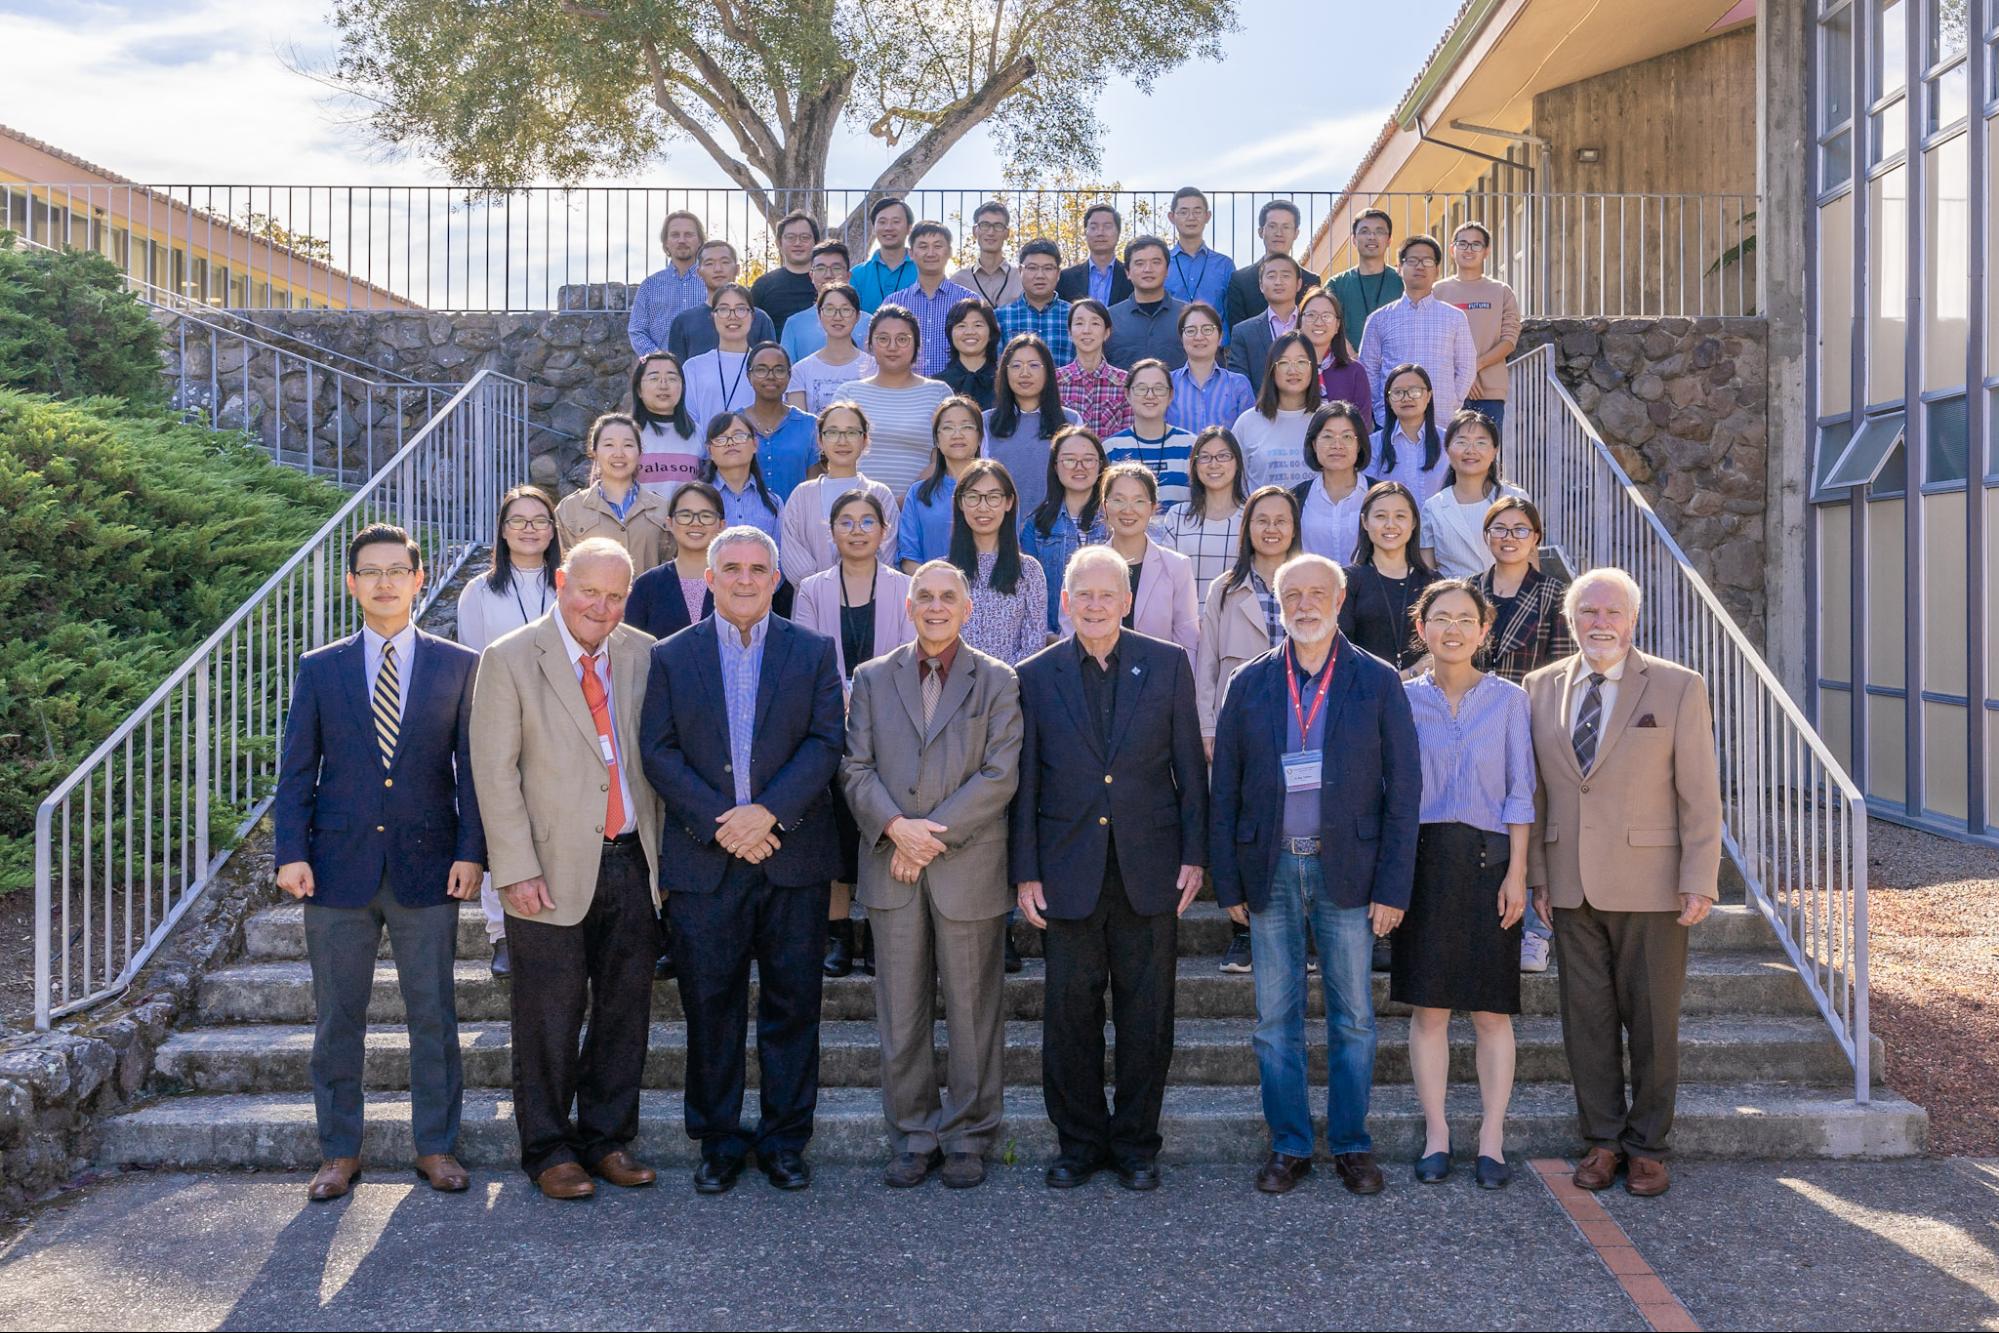 ZSDS Annual Doctoral Colloquium 2022 Successfully Concluded